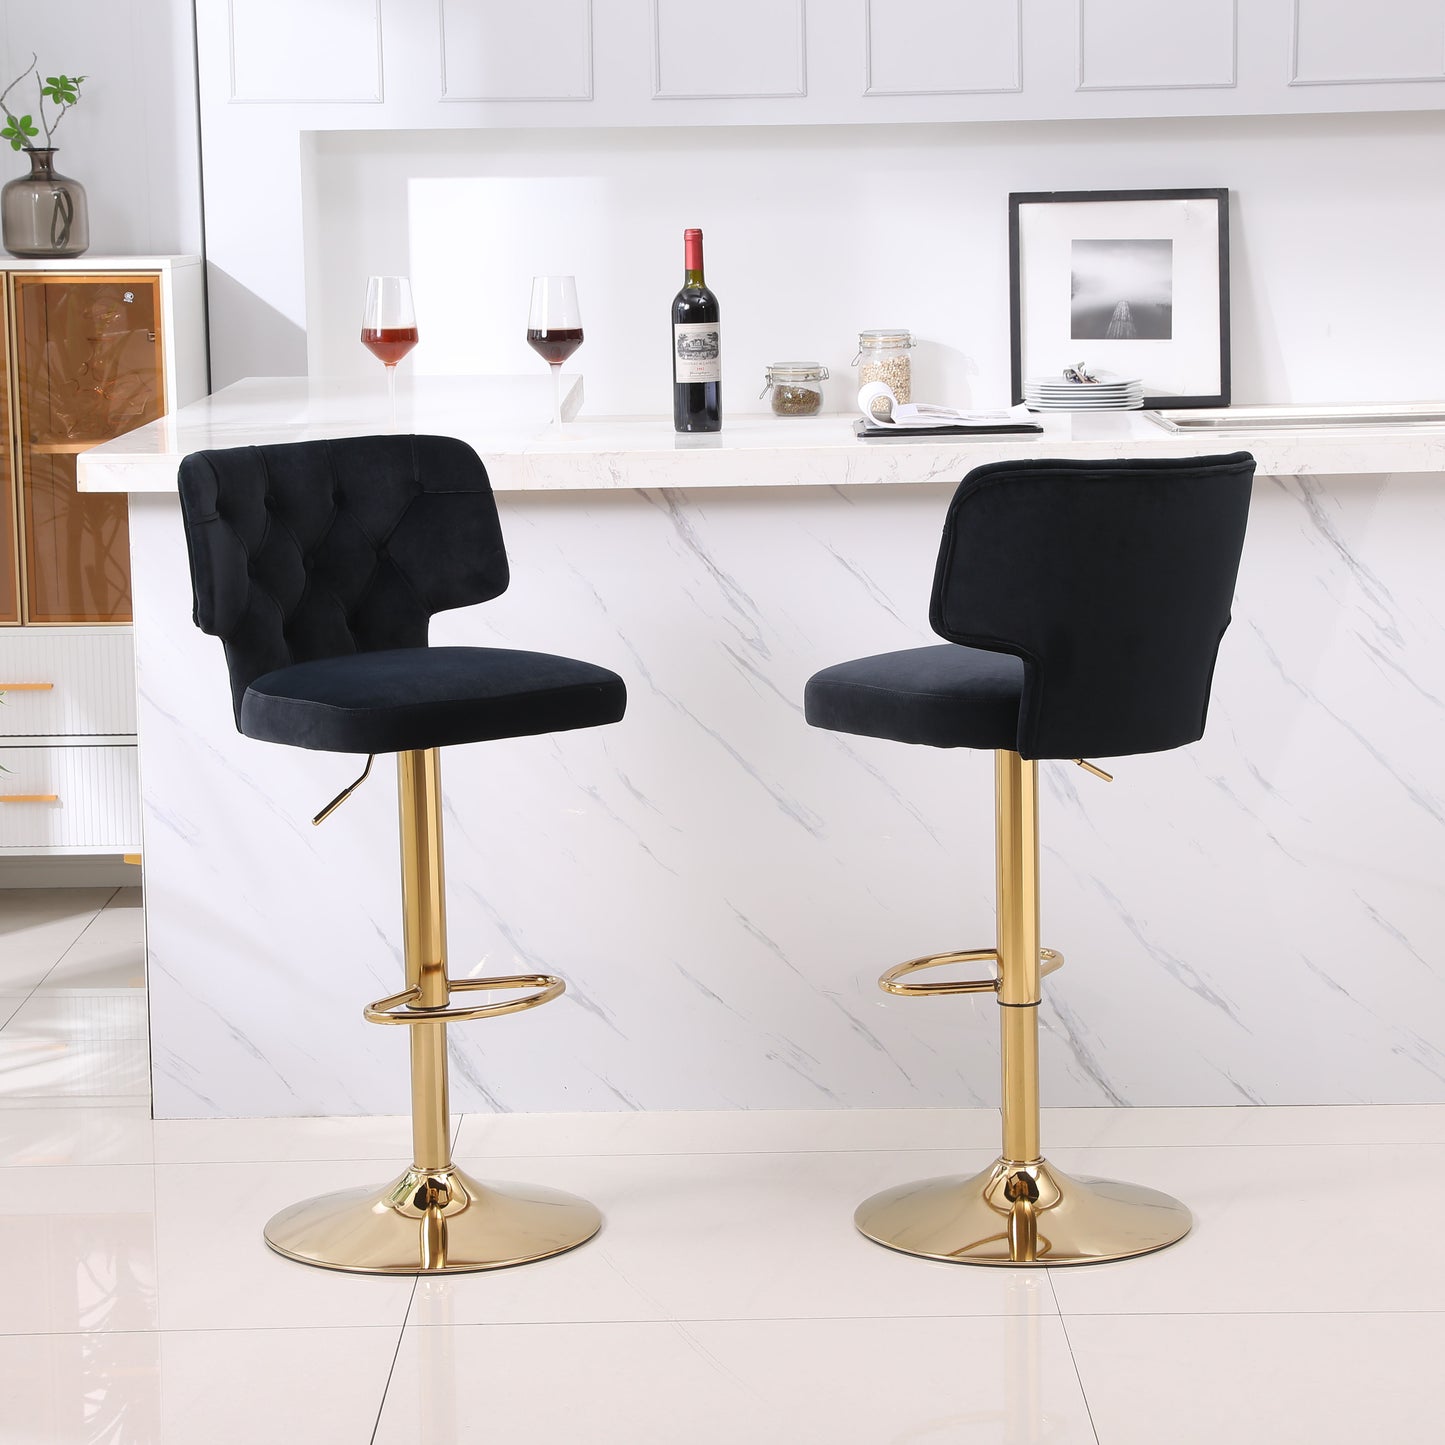 Modern Barstools Bar Height, Swivel Velvet Bar Stool Counter Height Bar Chairs Adjustable Tufted Stool with Back& Footrest for Home Bar Kitchen Island Chair (Black, Set of 2) - Enova Luxe Home Store